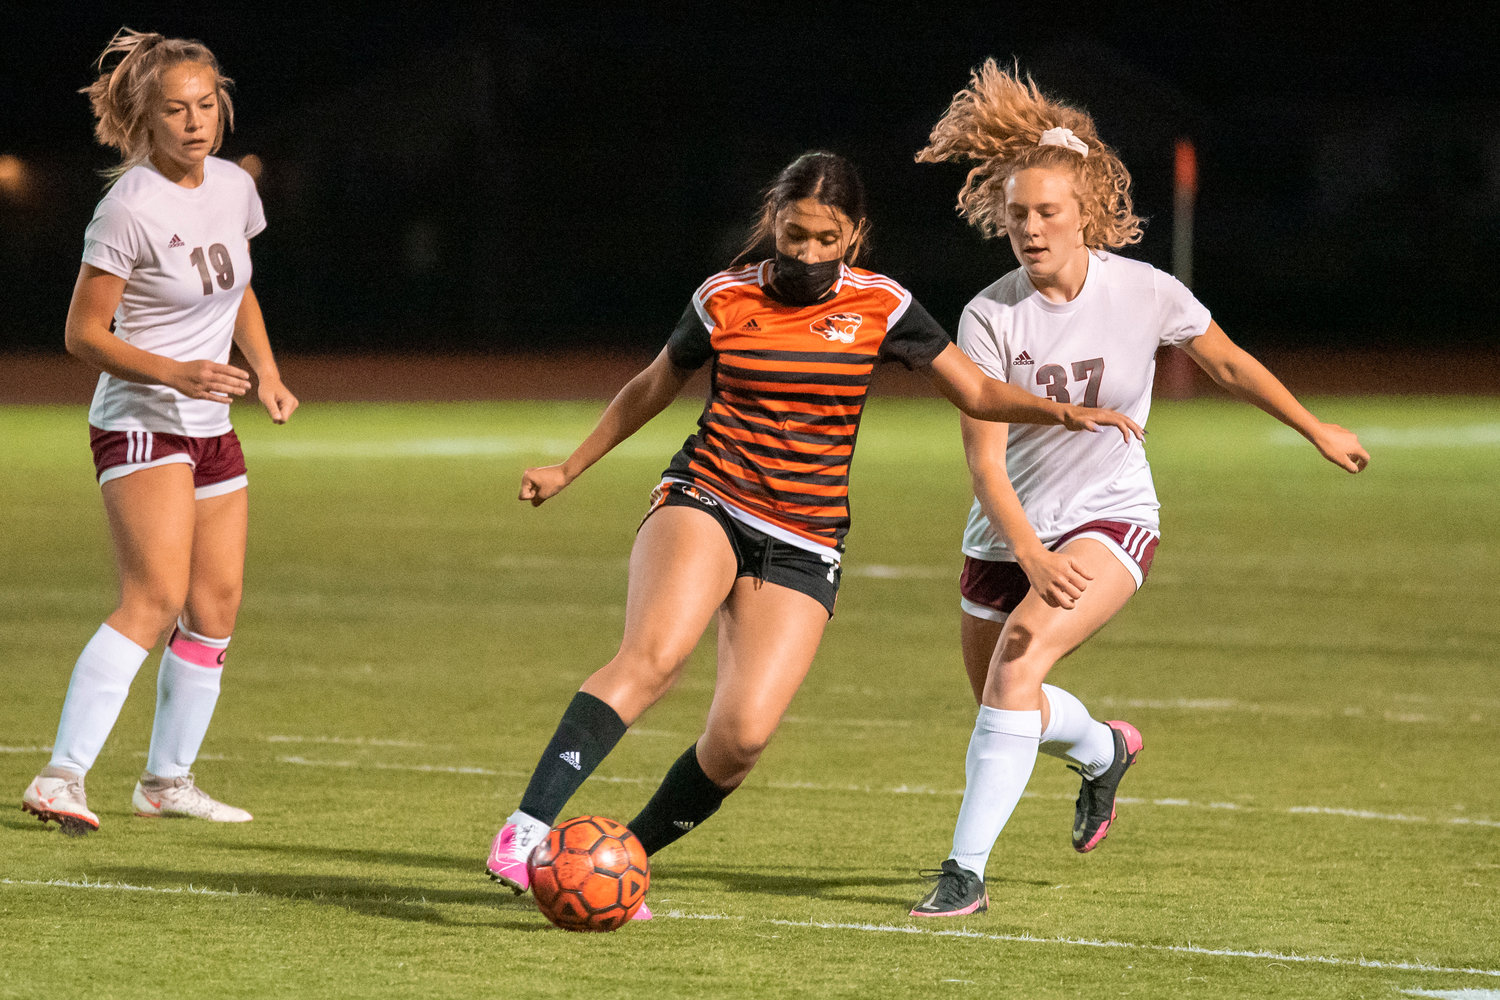 Centralia’s Michelle Maldonado (7) takes control of the ball during a game against W.F. West Tuesday night at Tiger Stadium.